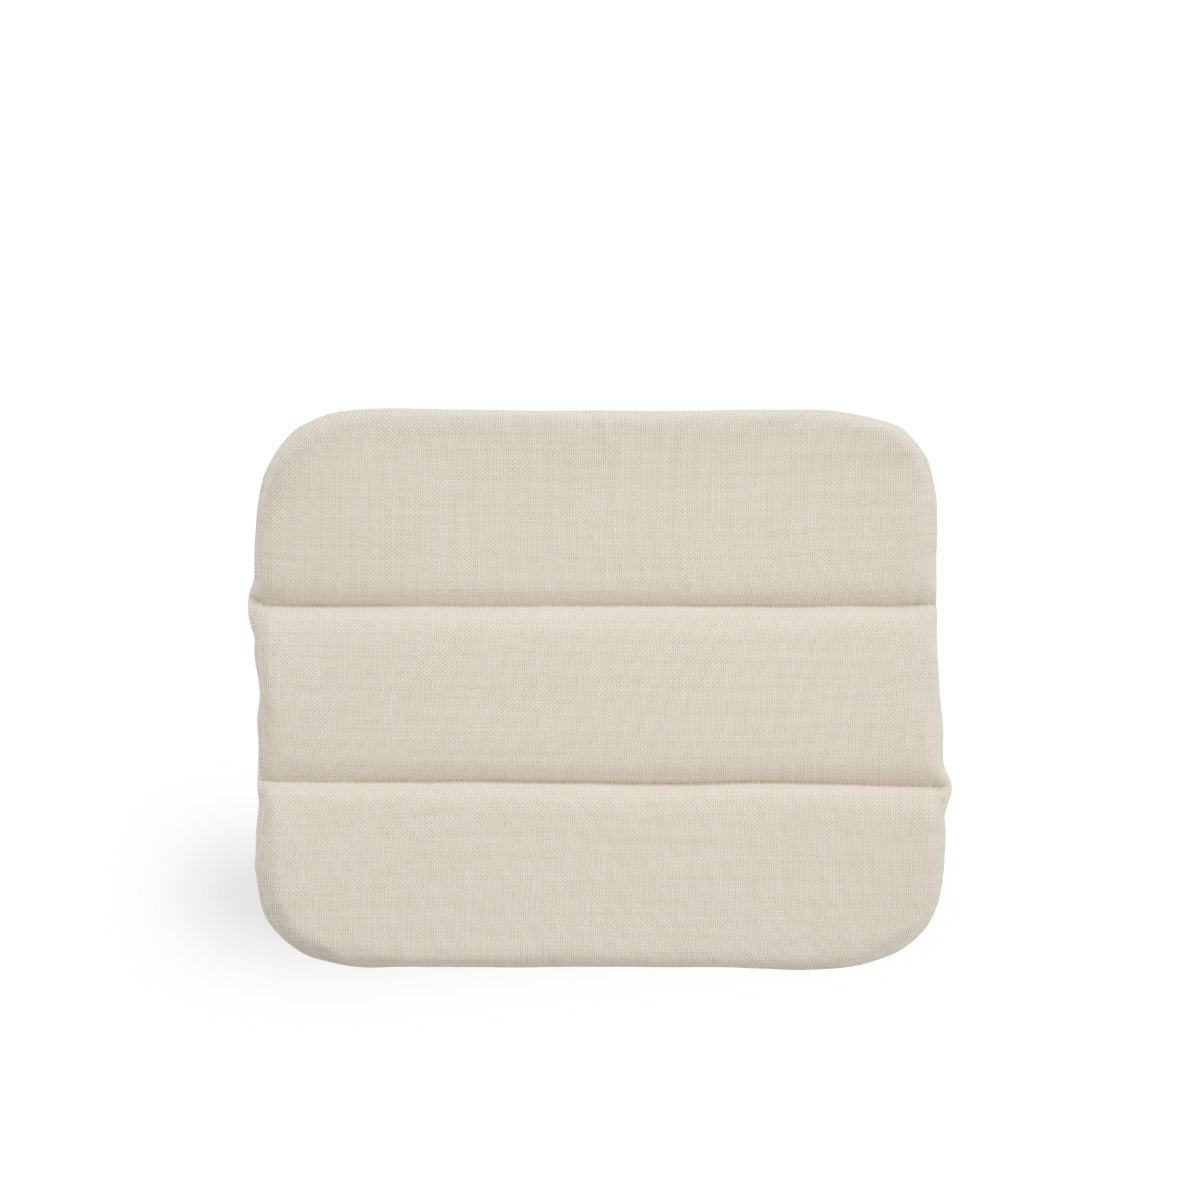 Monet Foot Stool | Seat cushion by Sika